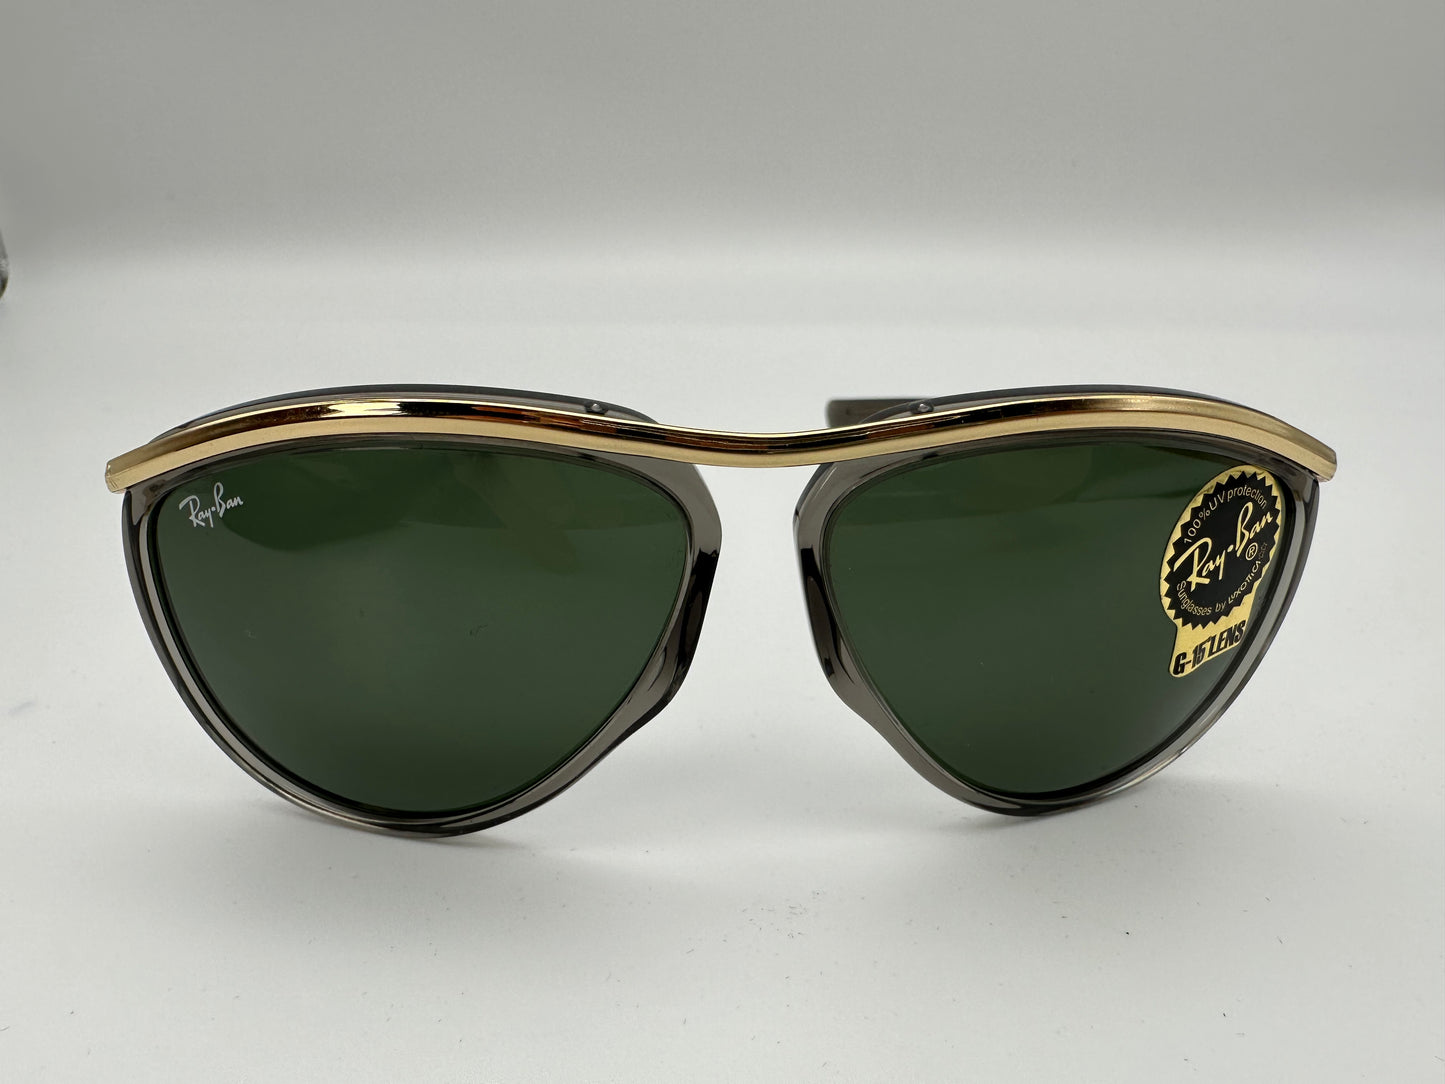 RAY BAN Sunglasses New Aviator Olympian 62mm Limited Edition RB2219 W3391 59 13 140